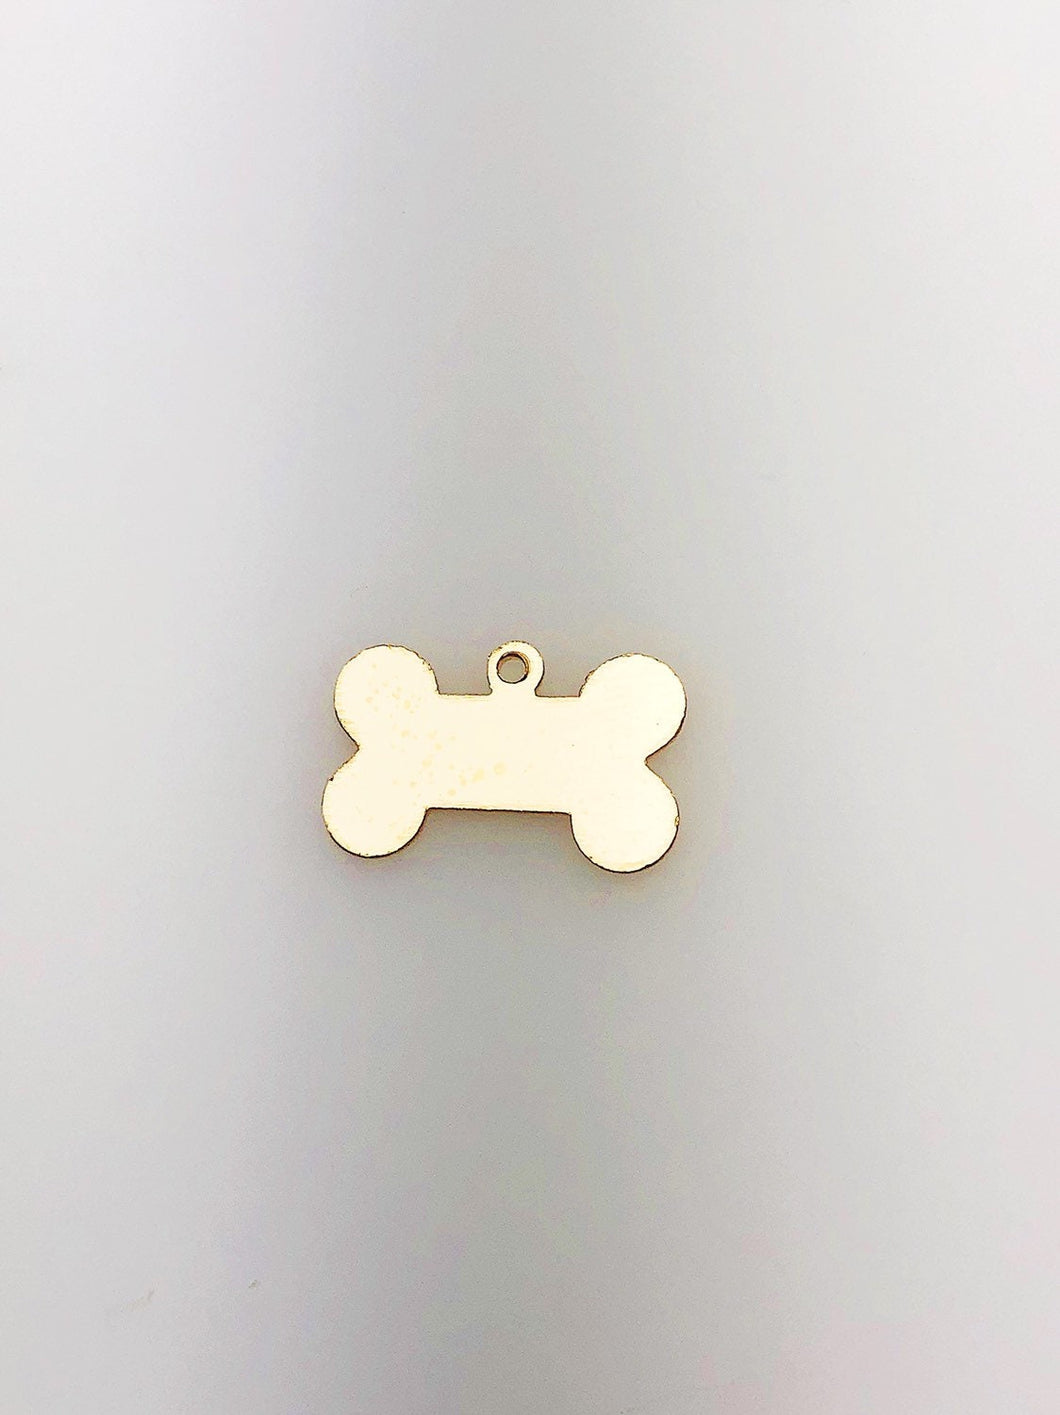 14K Gold Fill Bone Dog Tag Charm w/ Ring, 9.4x15.2mm, Made in USA - 2515